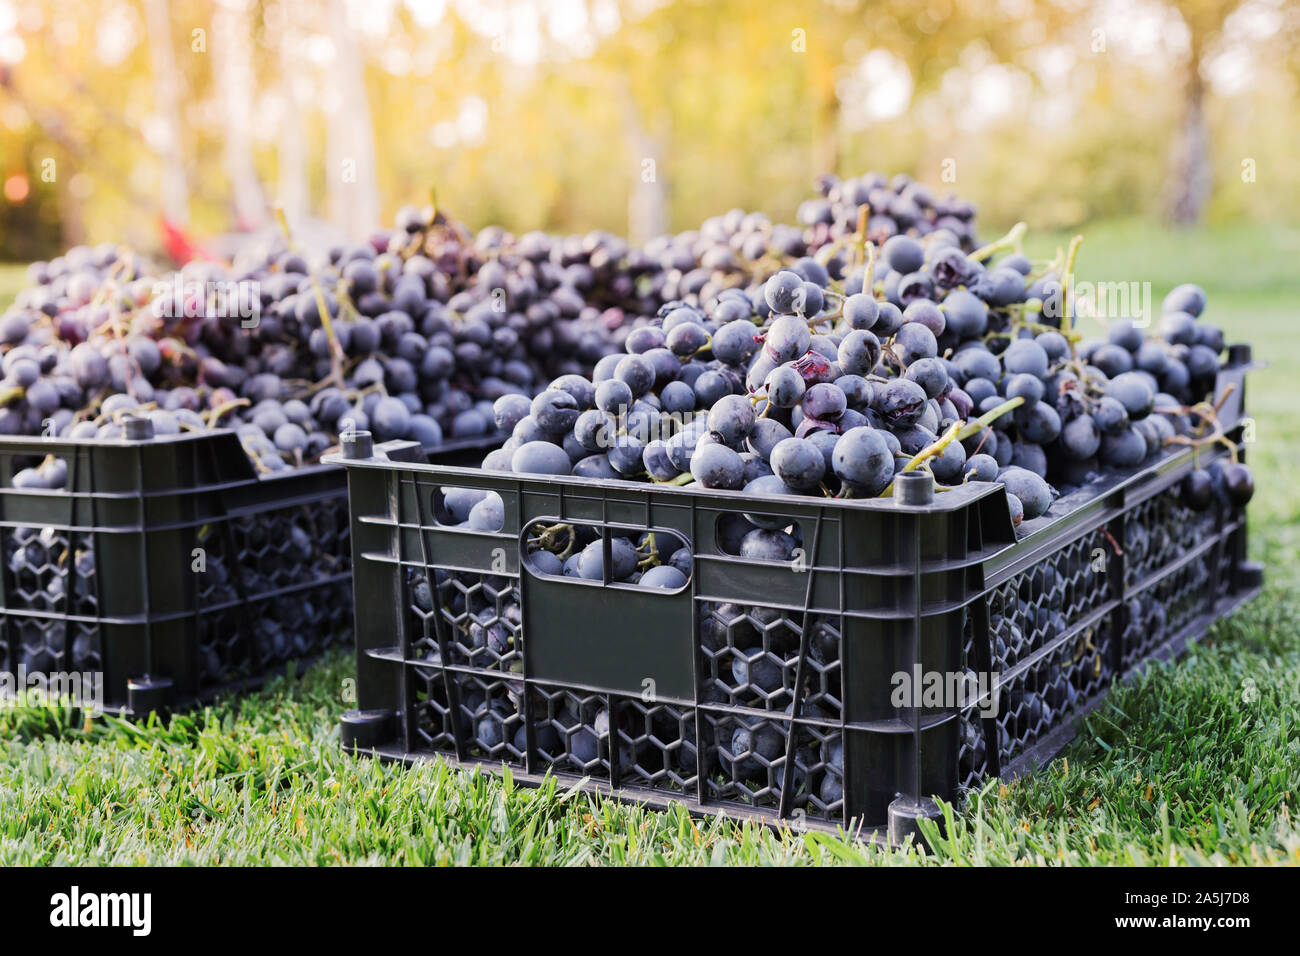 Baskets of Ripe bunches of black grapes outdoors. Autumn grapes harvest in vineyard on grass ready to delivery for wine making. Cabernet Sauvignon Stock Photo